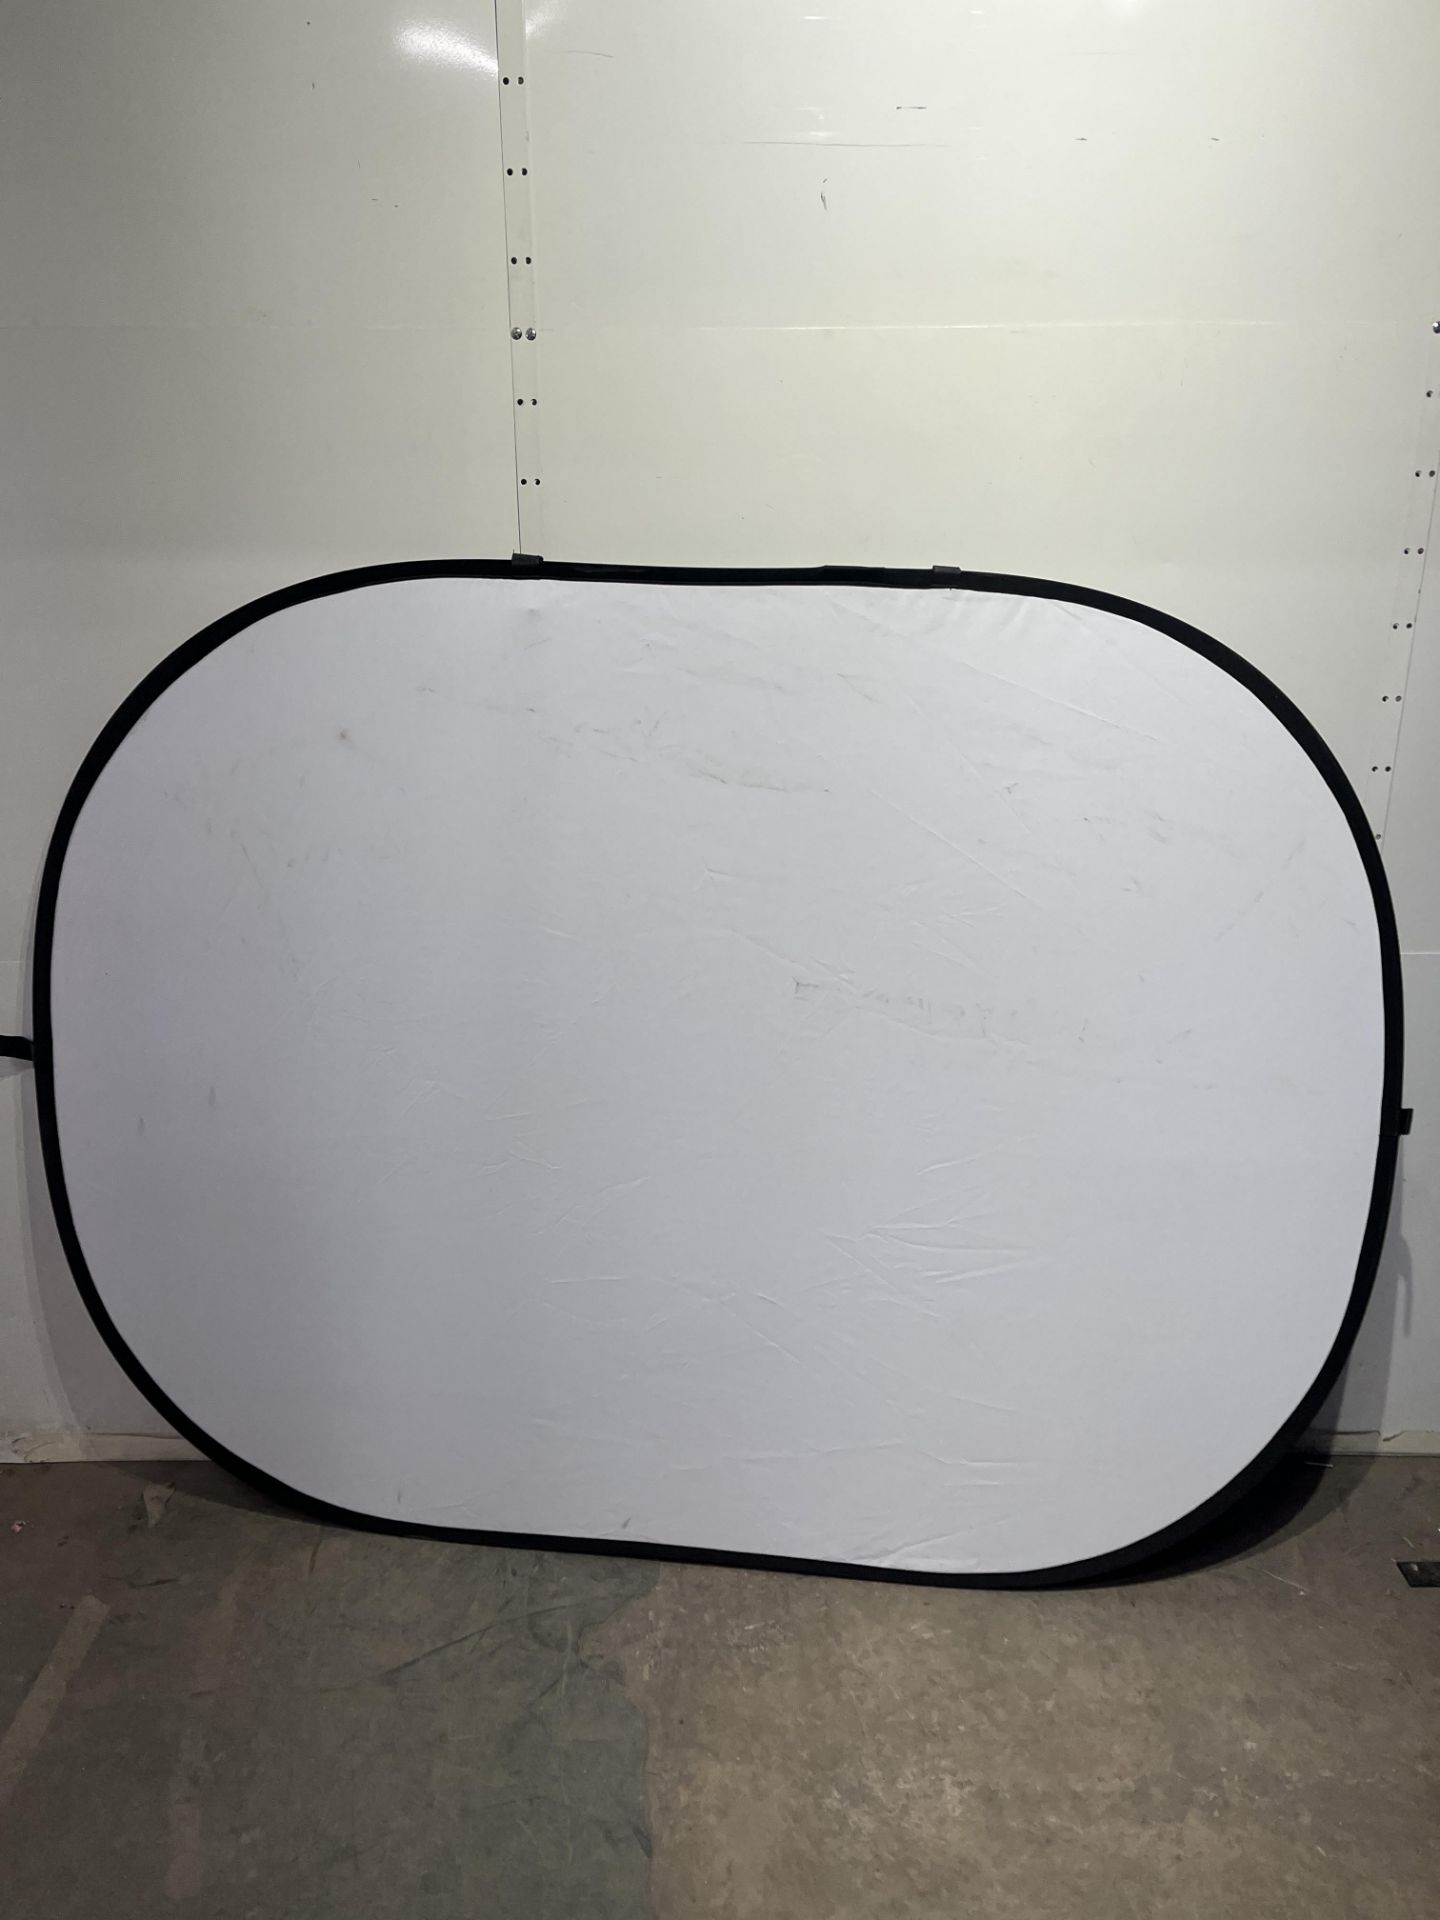 Foldable Photography Backdrop with Storage Bag - Image 5 of 5